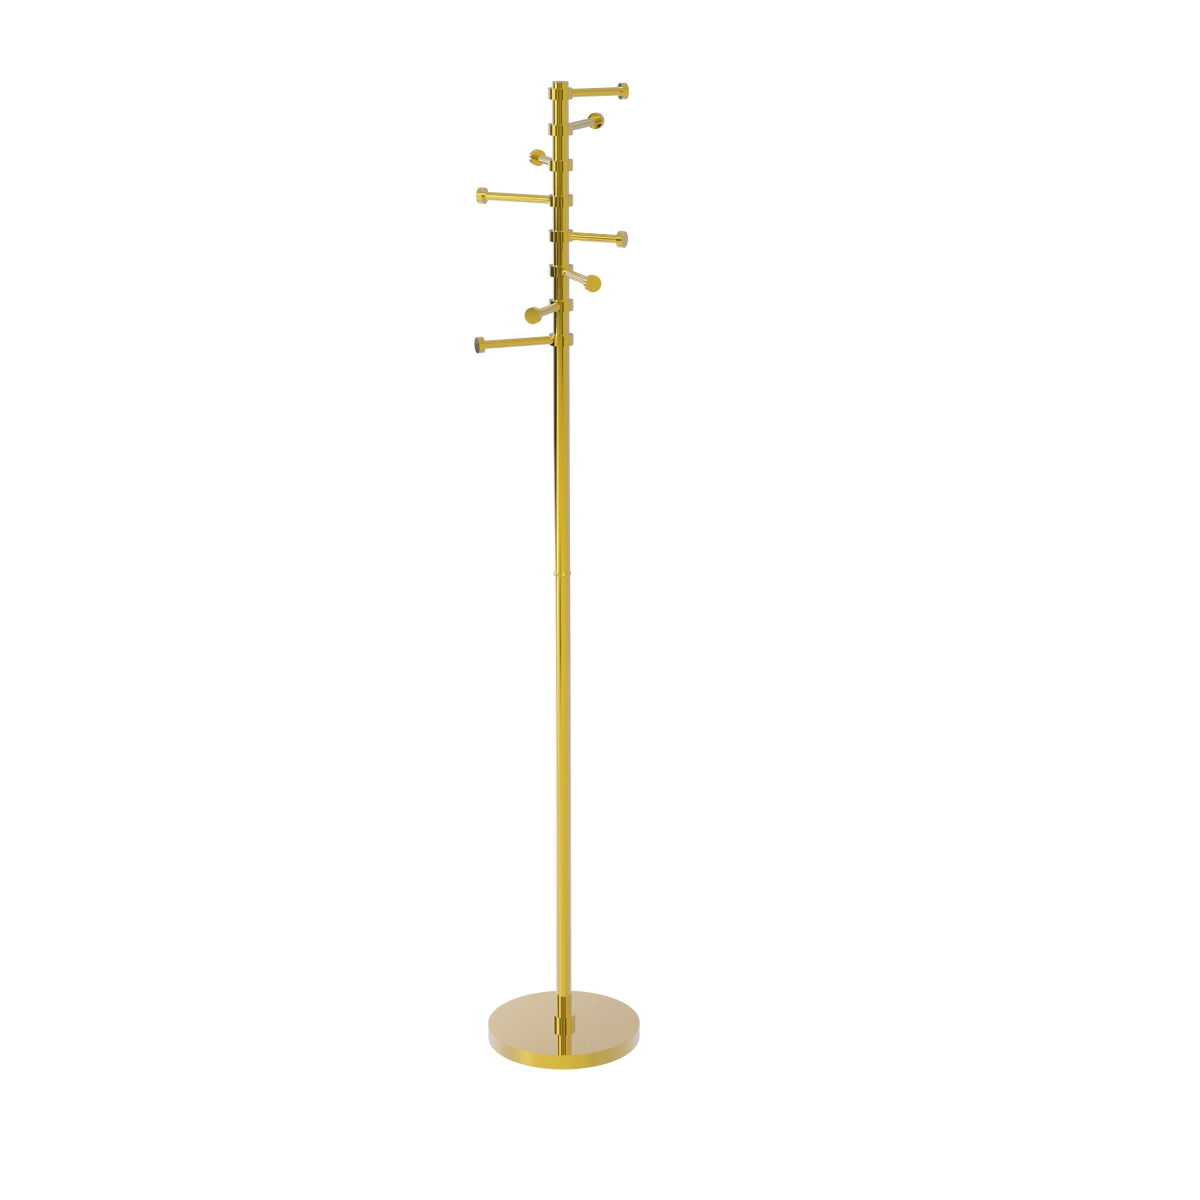 Picture of Allied Brass CS-1-PB Free Standing Coat Rack with Six Pivoting Pegs, Polished Brass